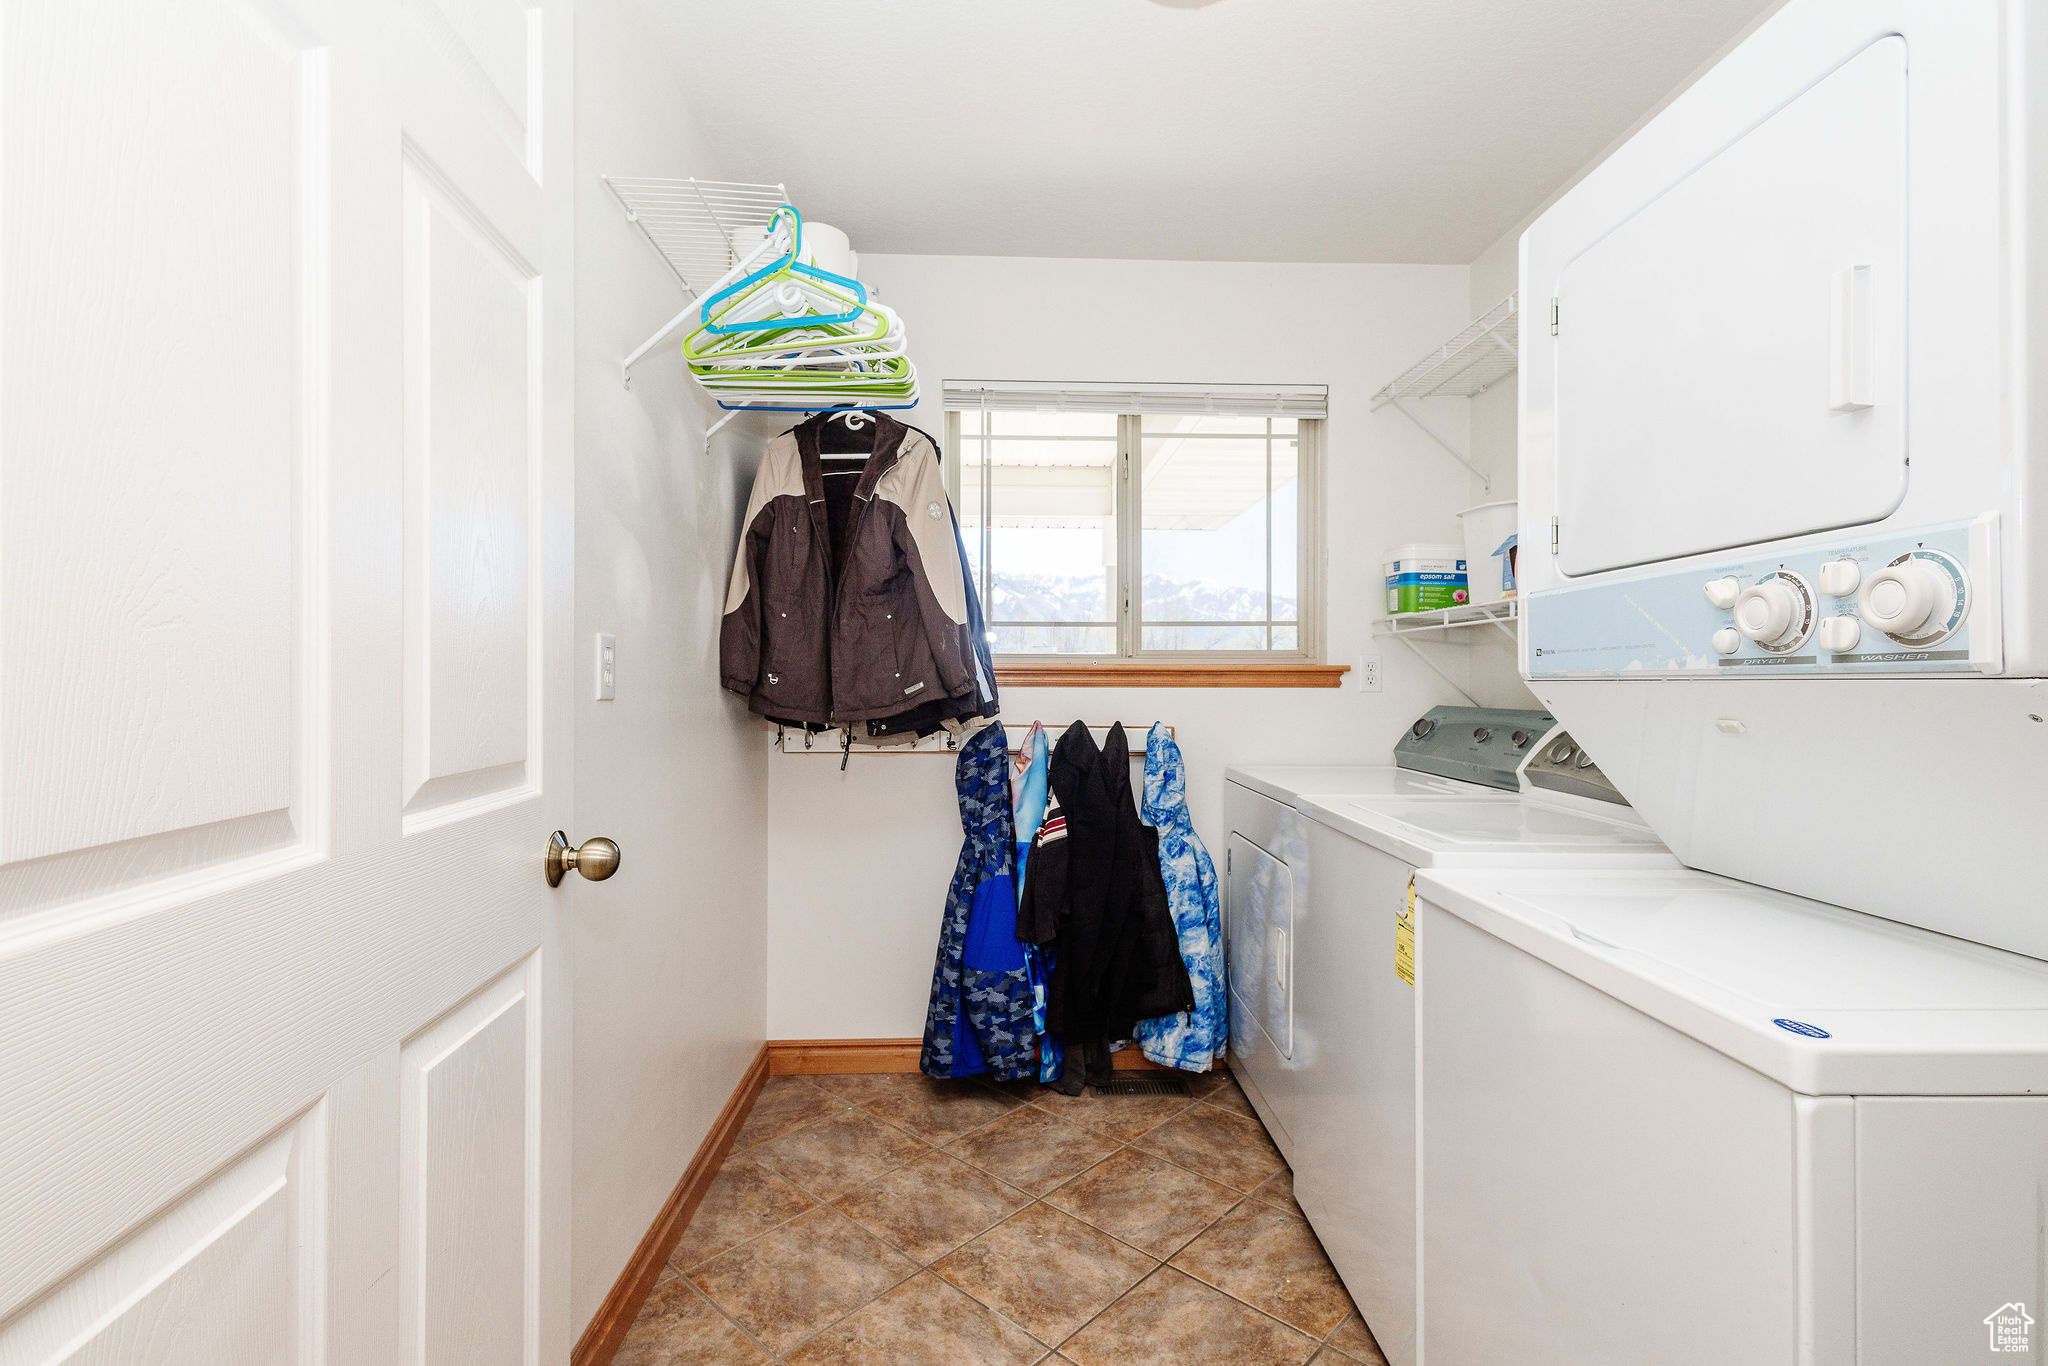 Laundry area featuring light tile floors and 2nd stacked washing dryer. Not simultaneous operation.